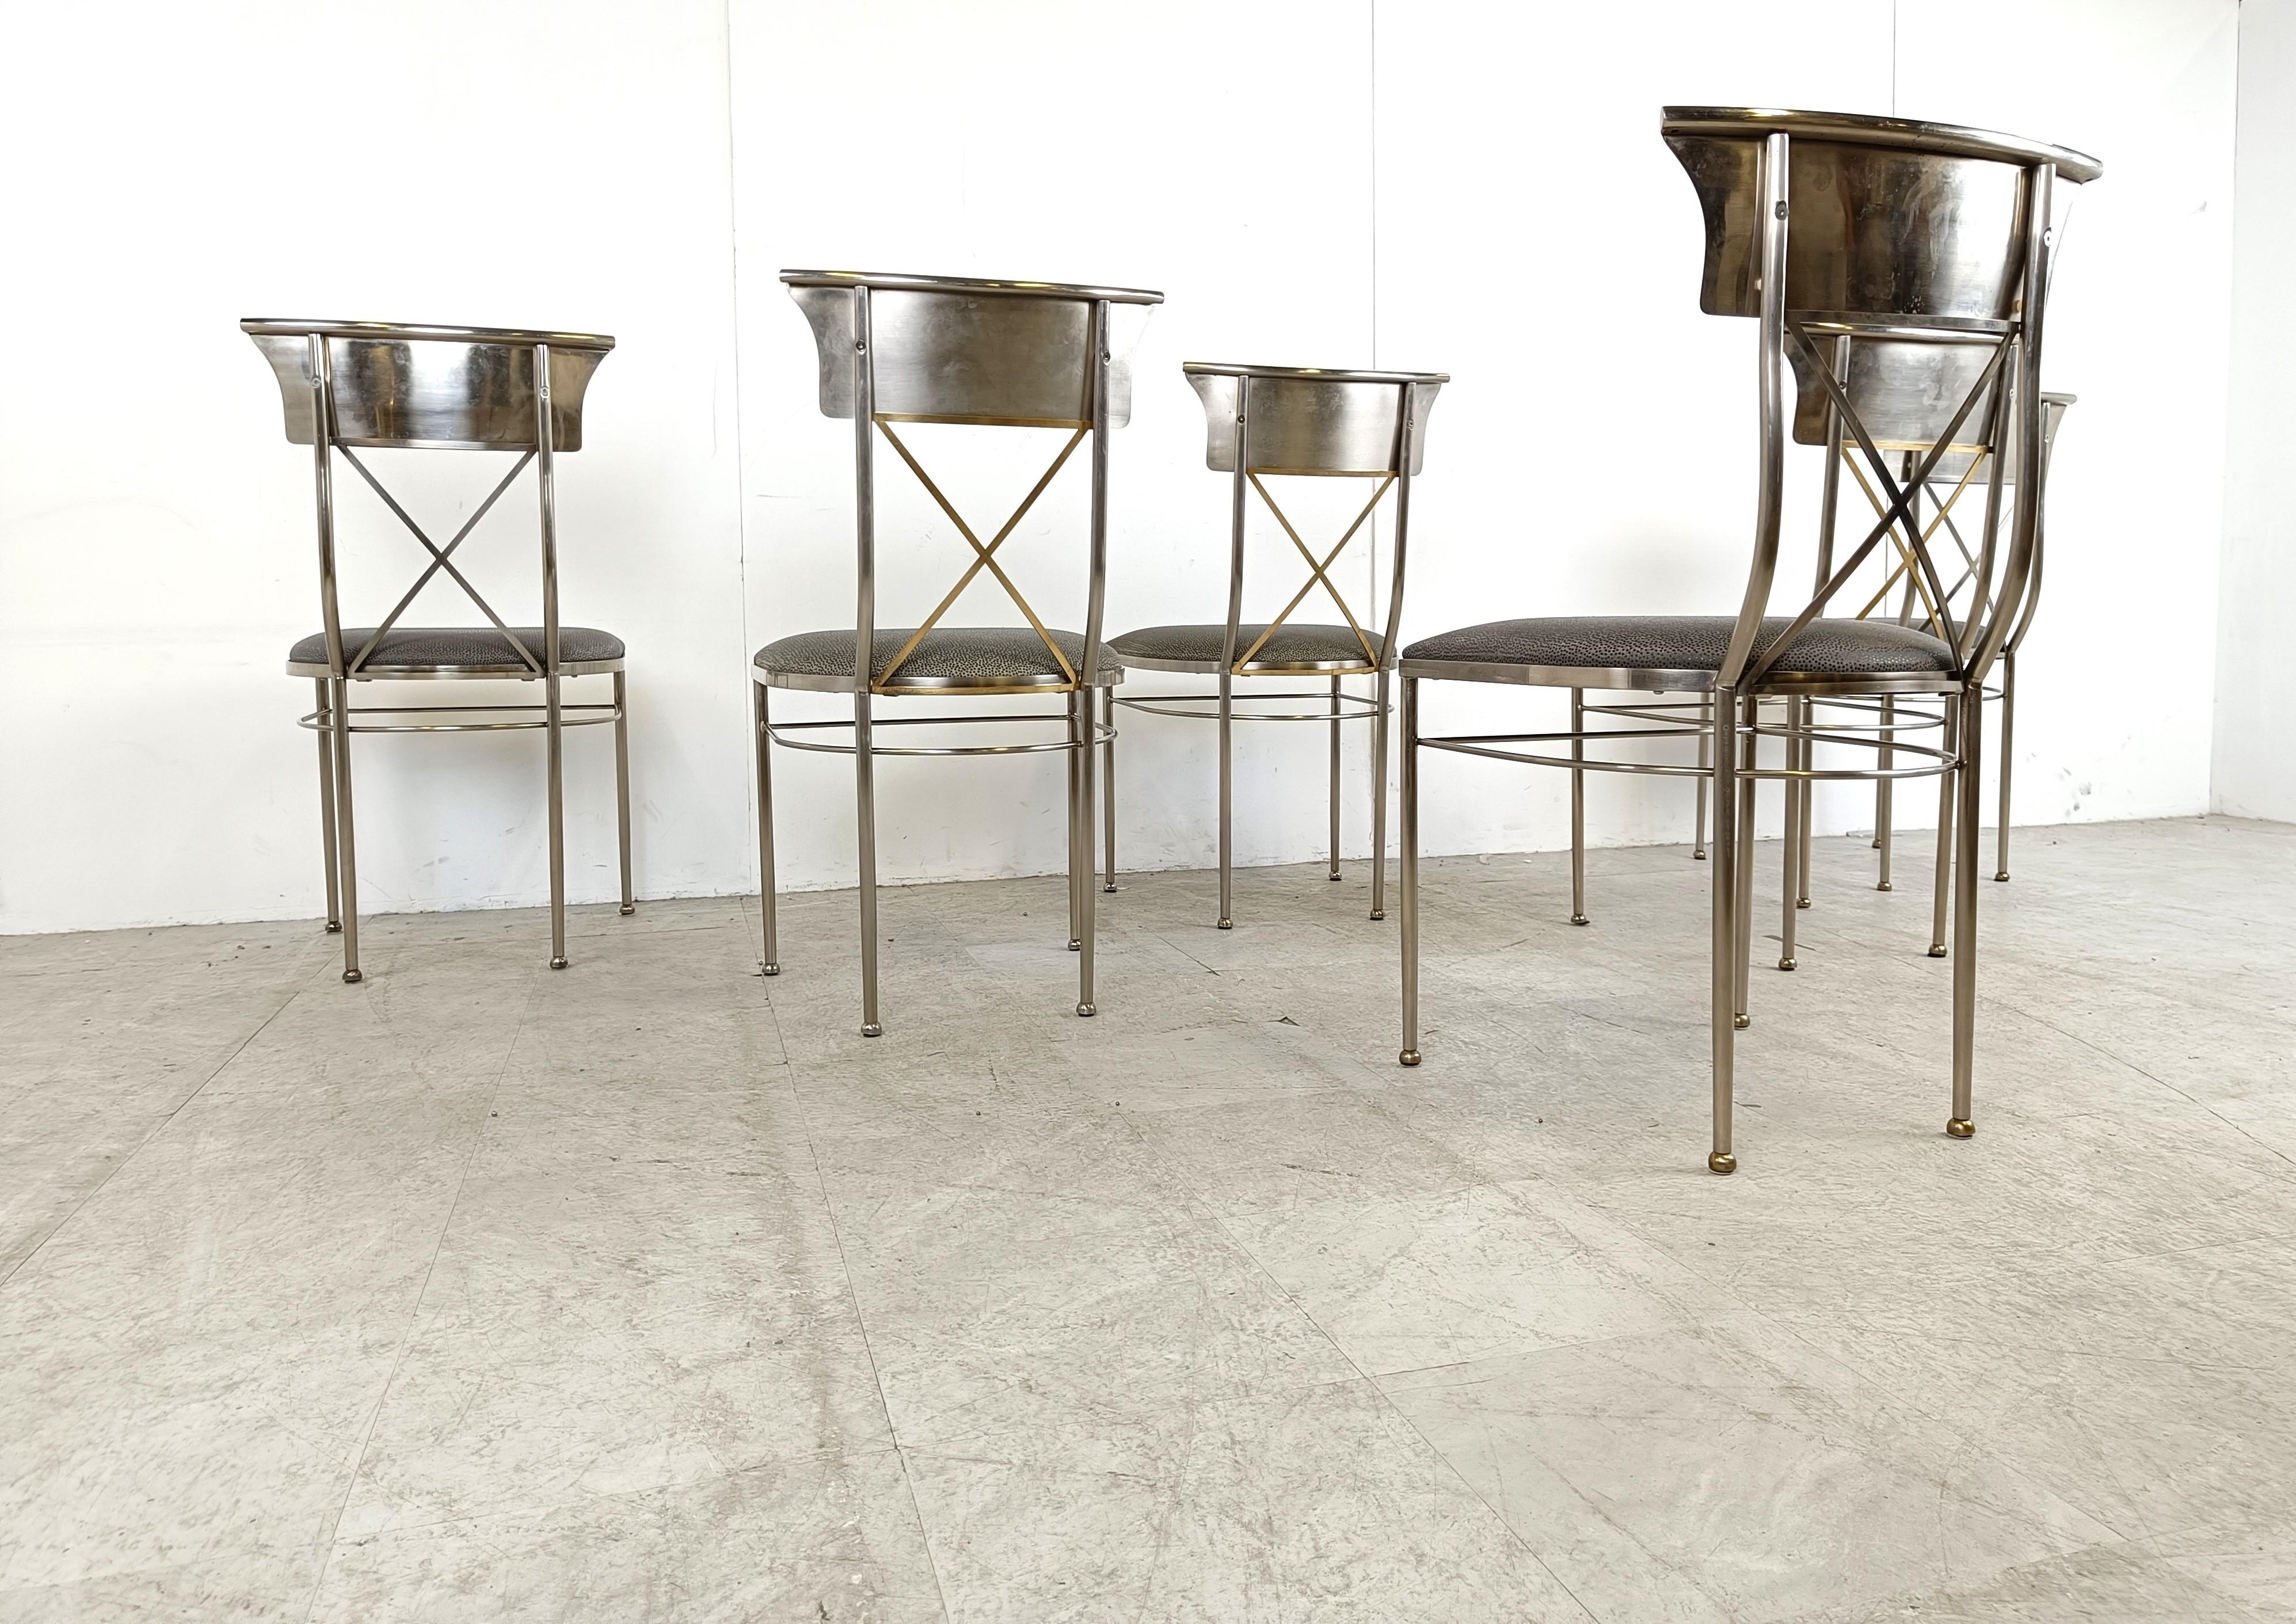 Steel Vintage dining chairs by Belgo chrom, set of 6 - 1970s